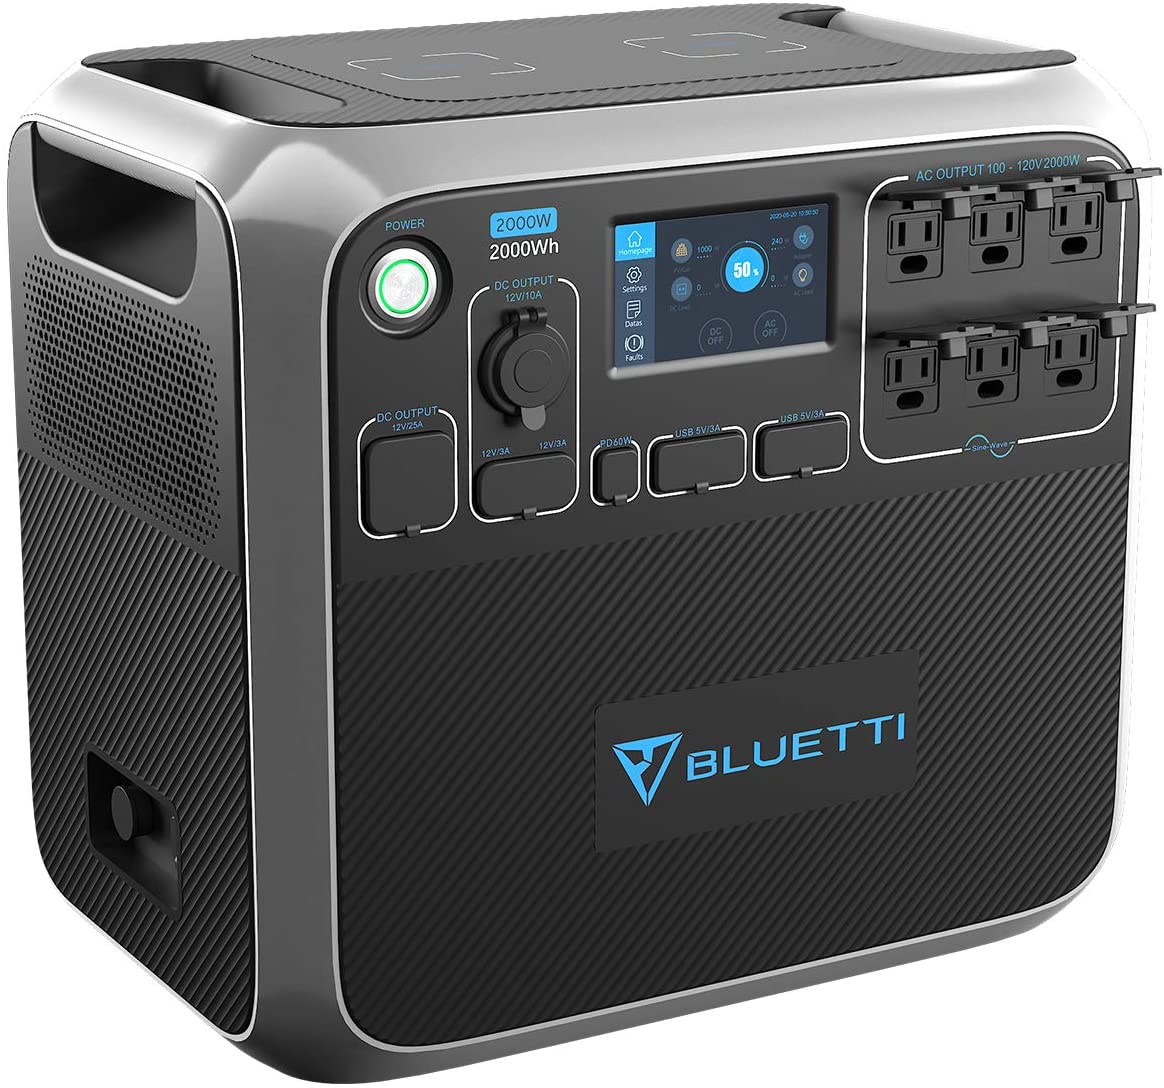 $37/mo - Finance BLUETTI AC30 Portable Power Station 300Wh LiFePO4 Solar Generator, 300W Inverter 2 110V Pure Sine Wave AC Outlets, 1 Type-C 2 USB-A 1 DC 12V/10A Outlets for Home Emergency